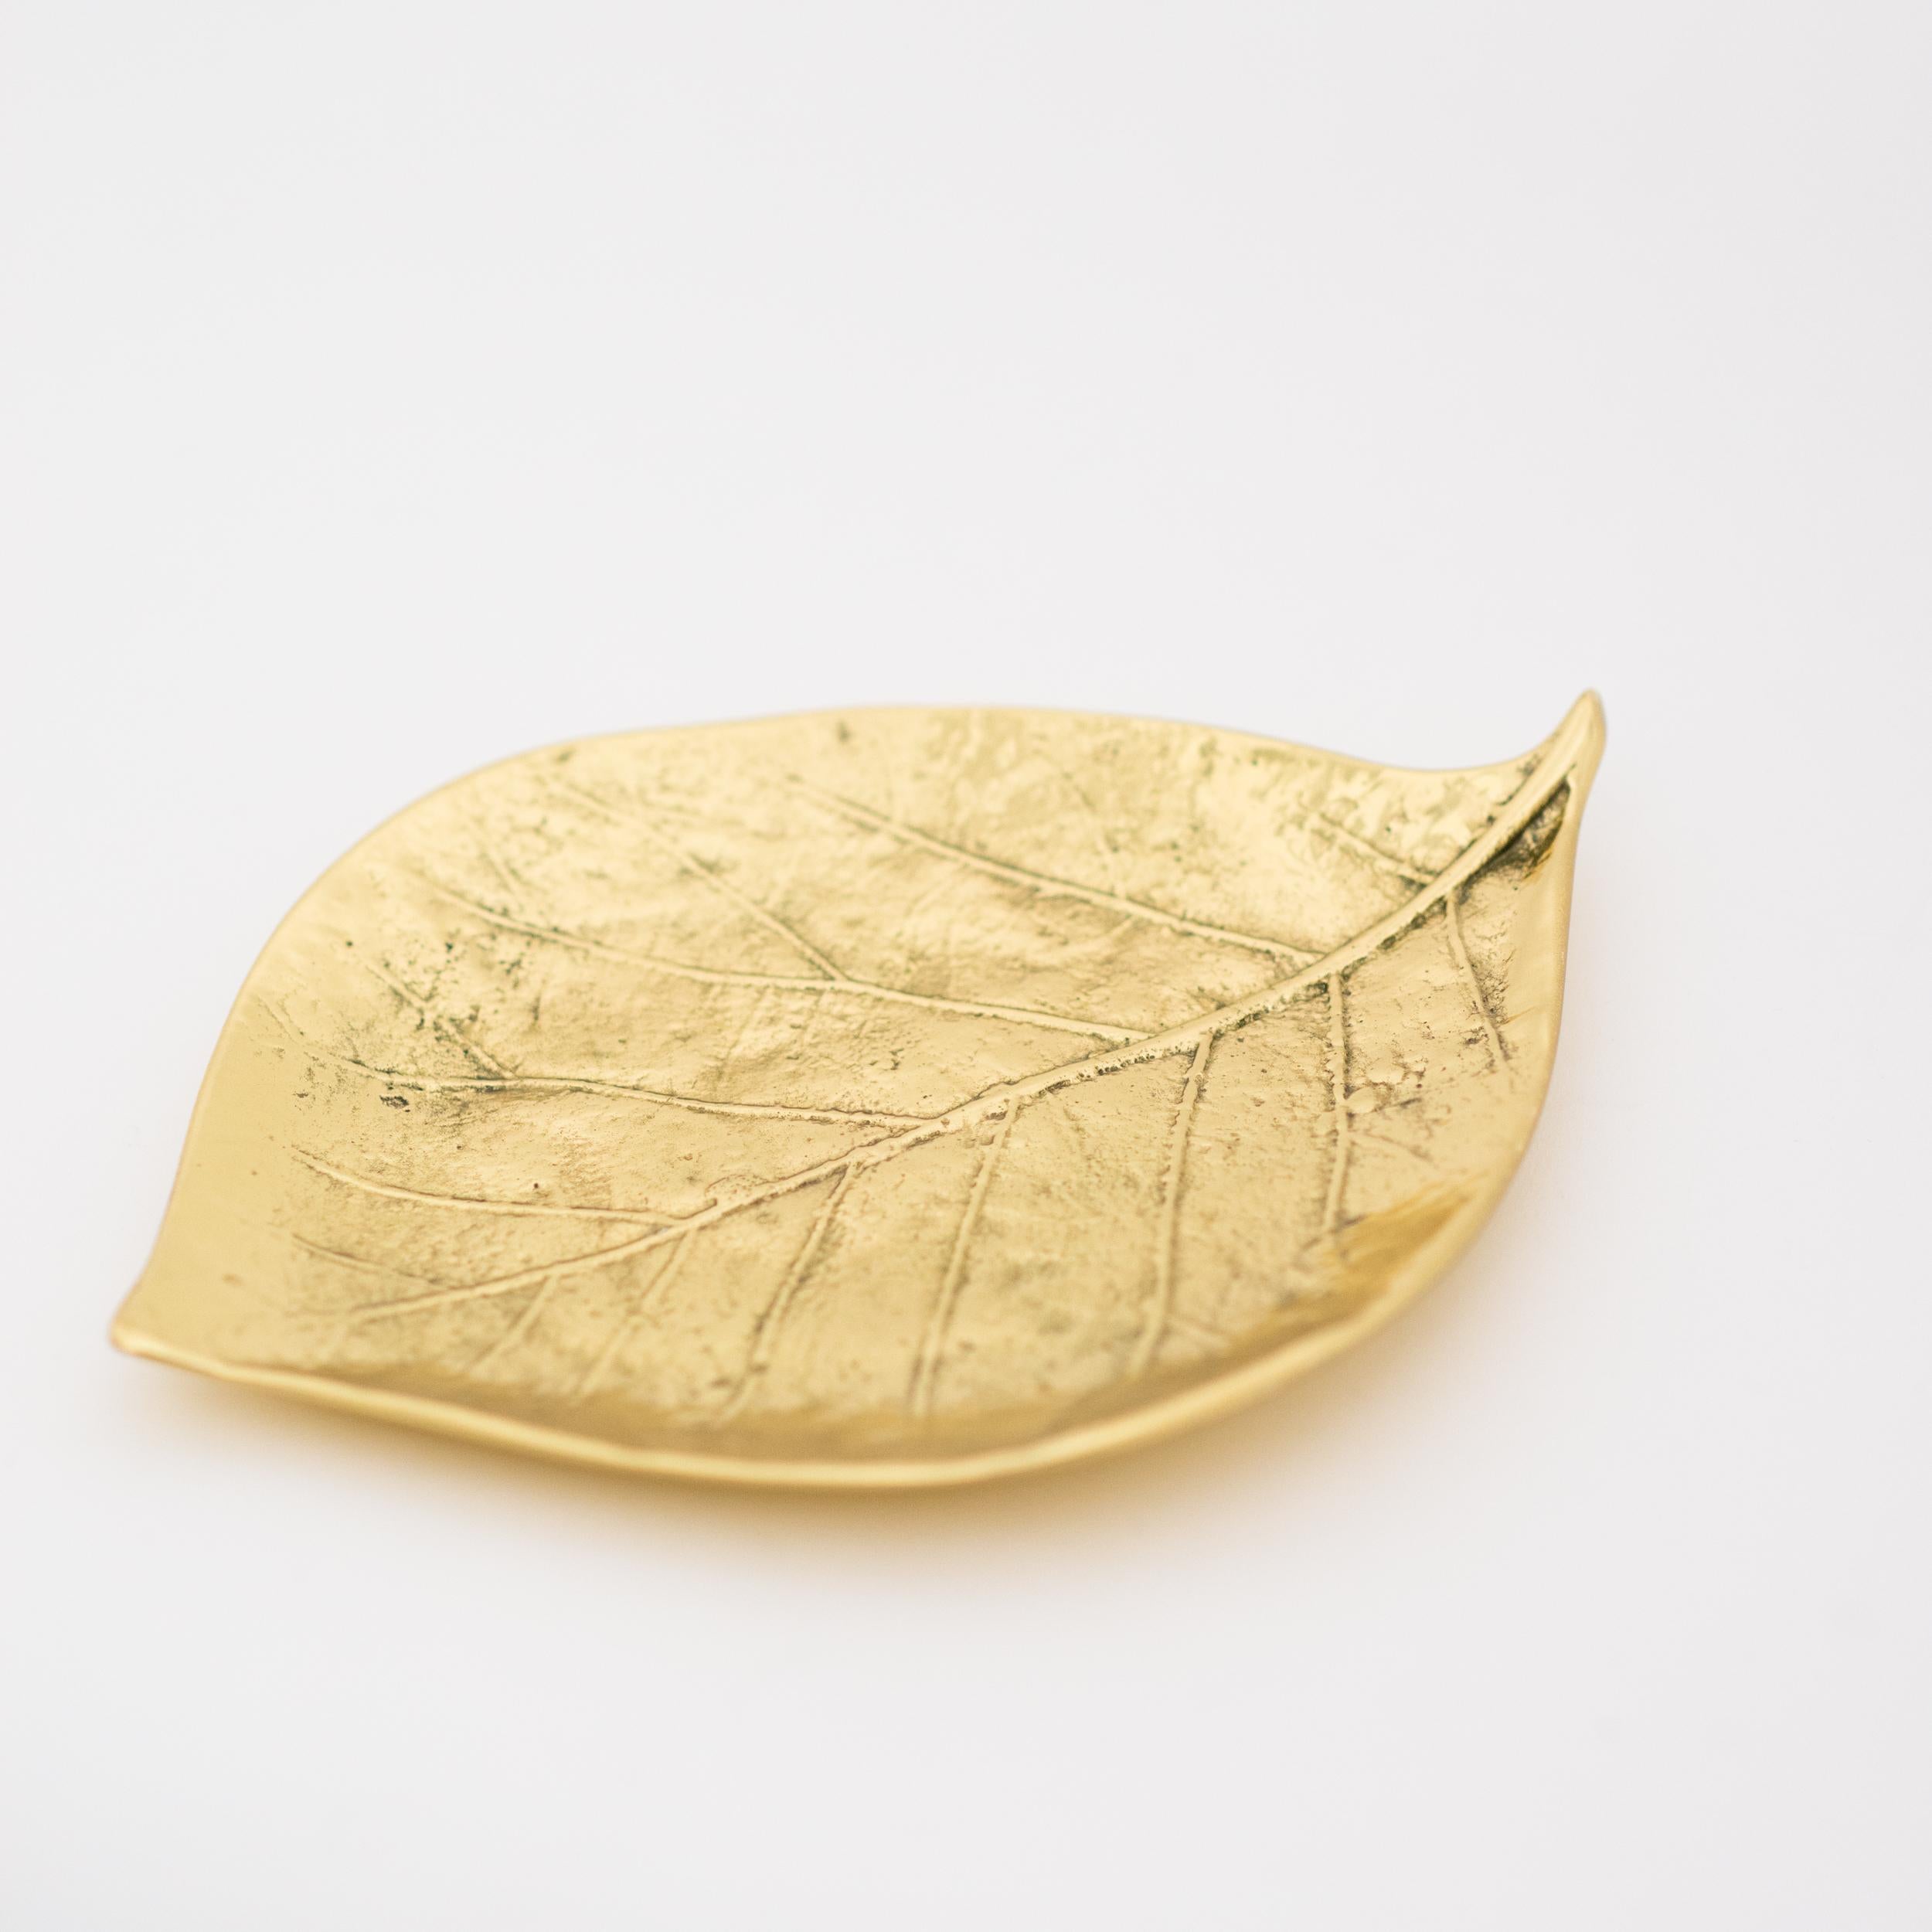 Each of these splendid brass leaves is handmade individually with incredible detail. Cast using very traditional techniques, they are polished capturing the raw finish of this noble material and impressively highlighting every vein and detail.

Used